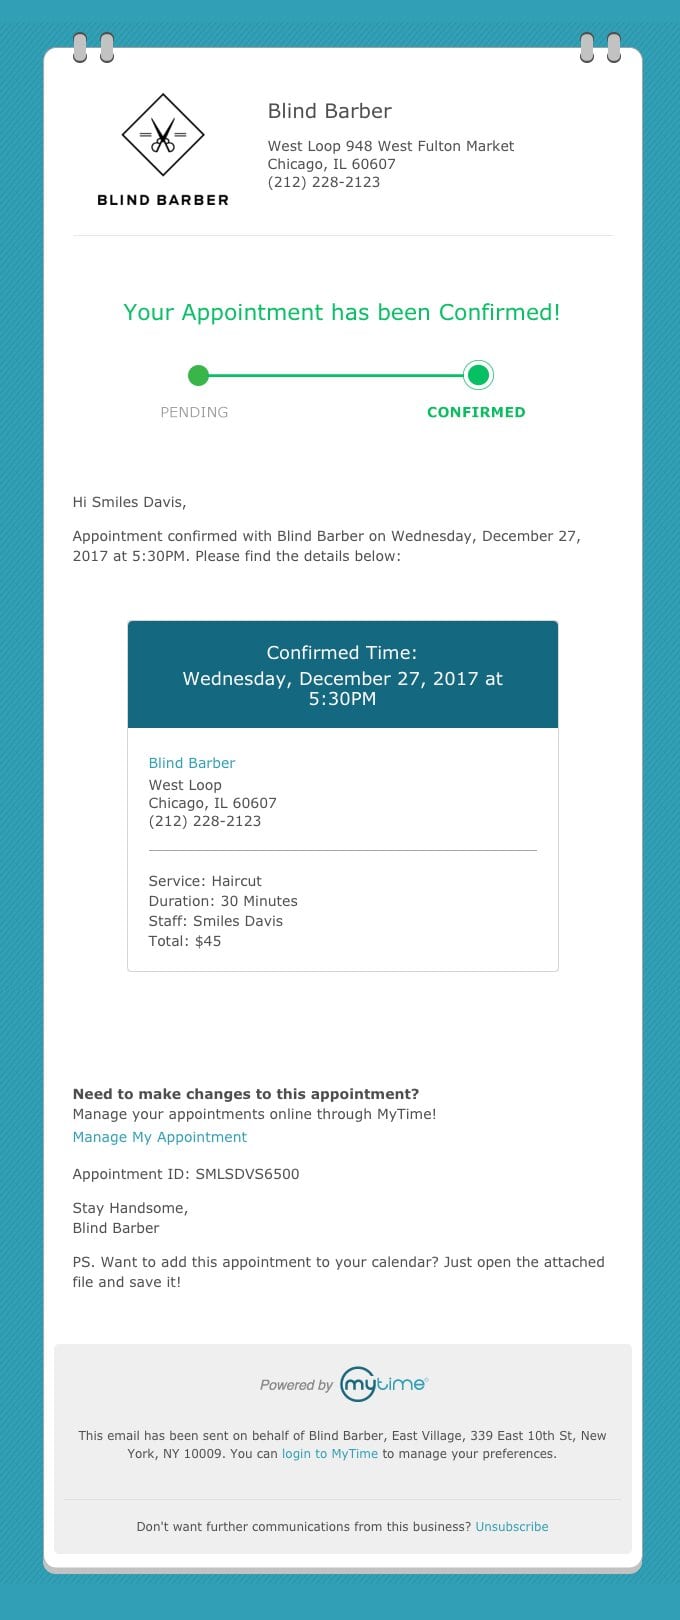 Appointment Confirmation email example by Blind Barber